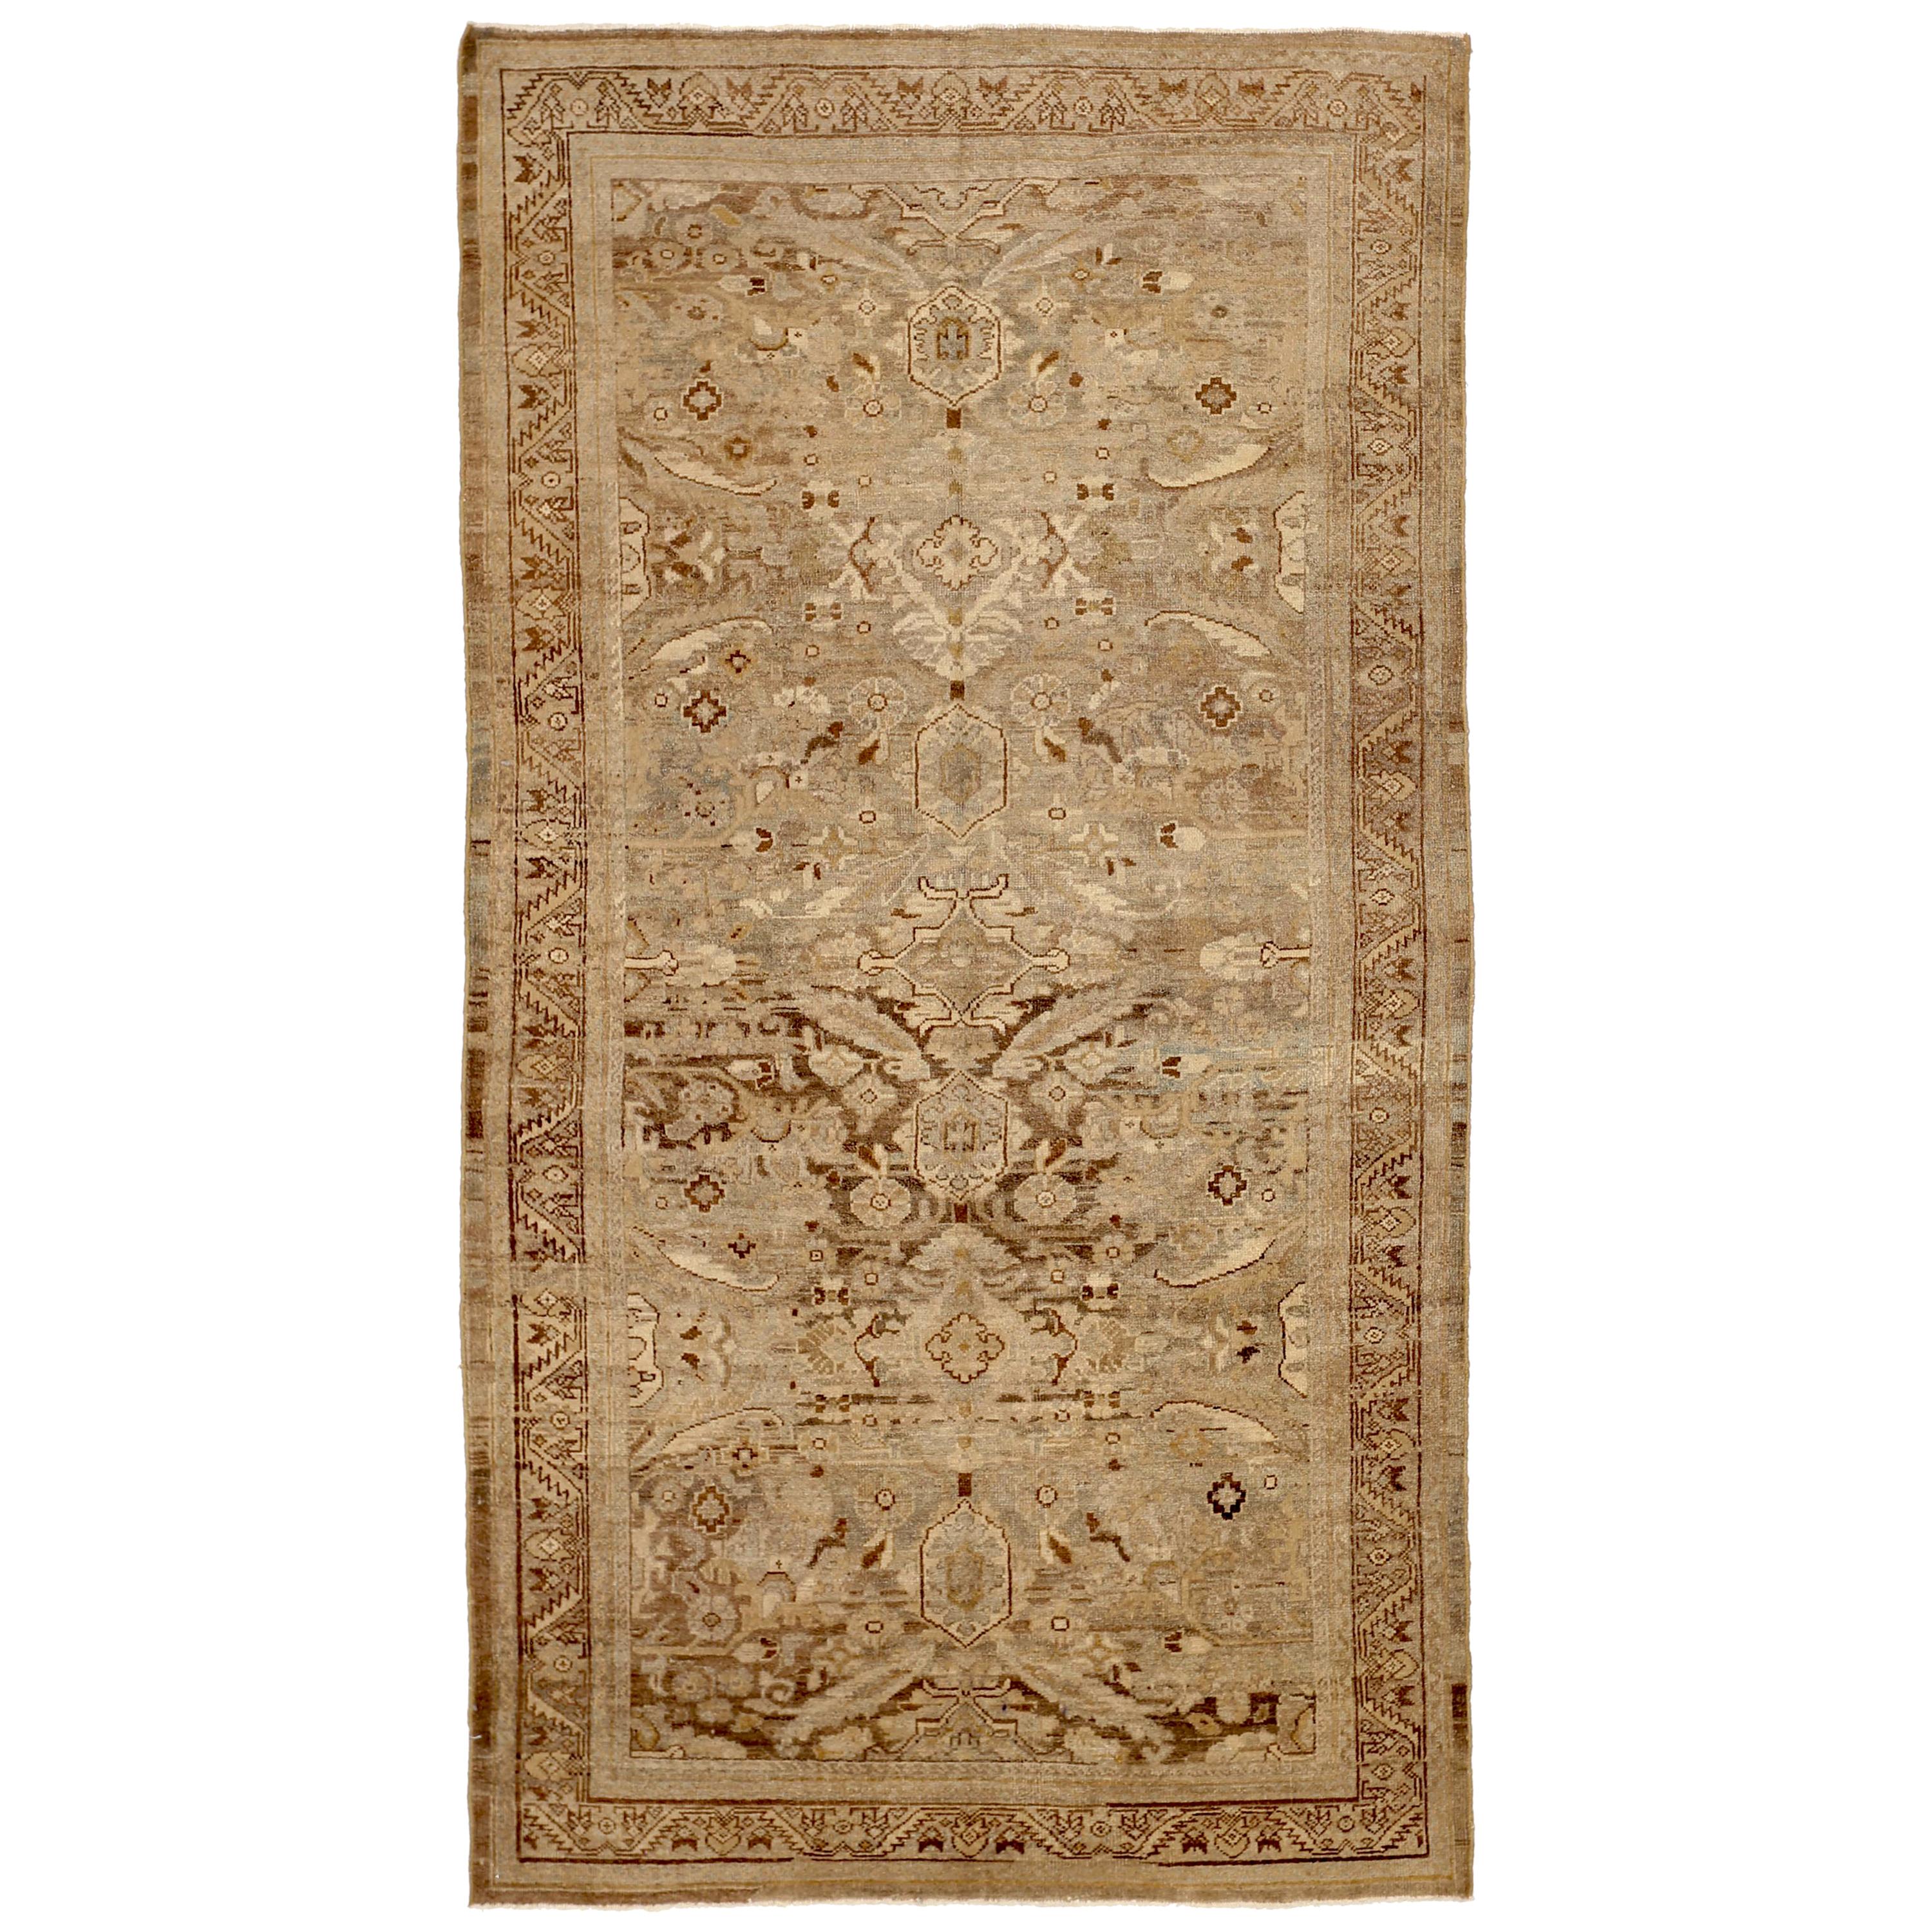 Square Antique Persian Sultanabad Rug with Floral Details on Brown Field